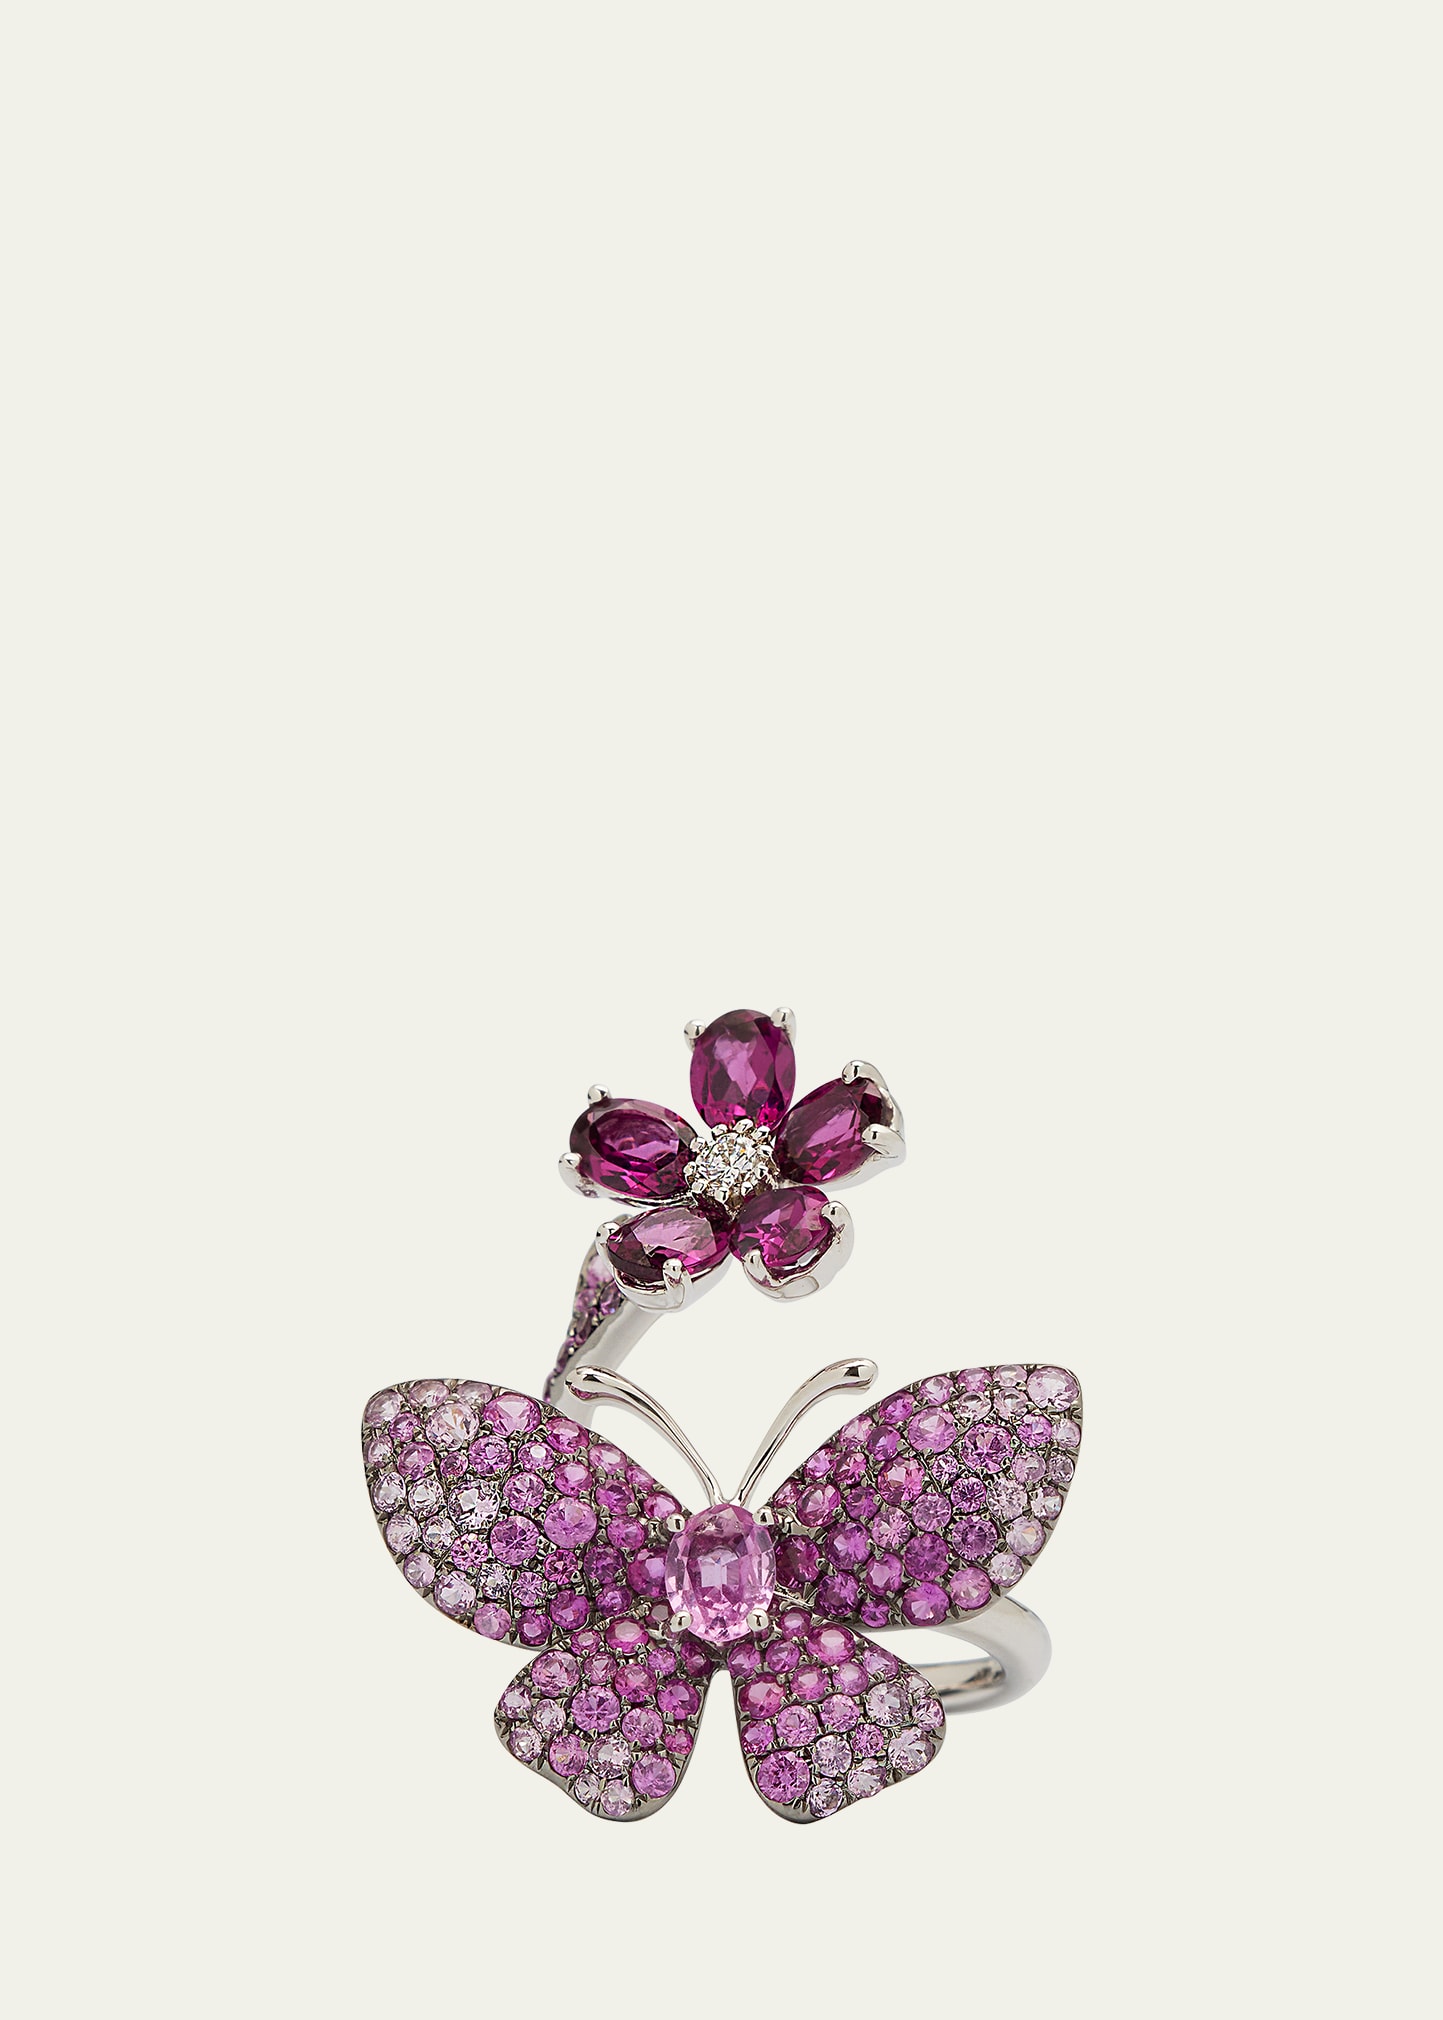 Rose Gold Pink Sapphire and Rhodolite Garnet Ring from The Butterfly Collection